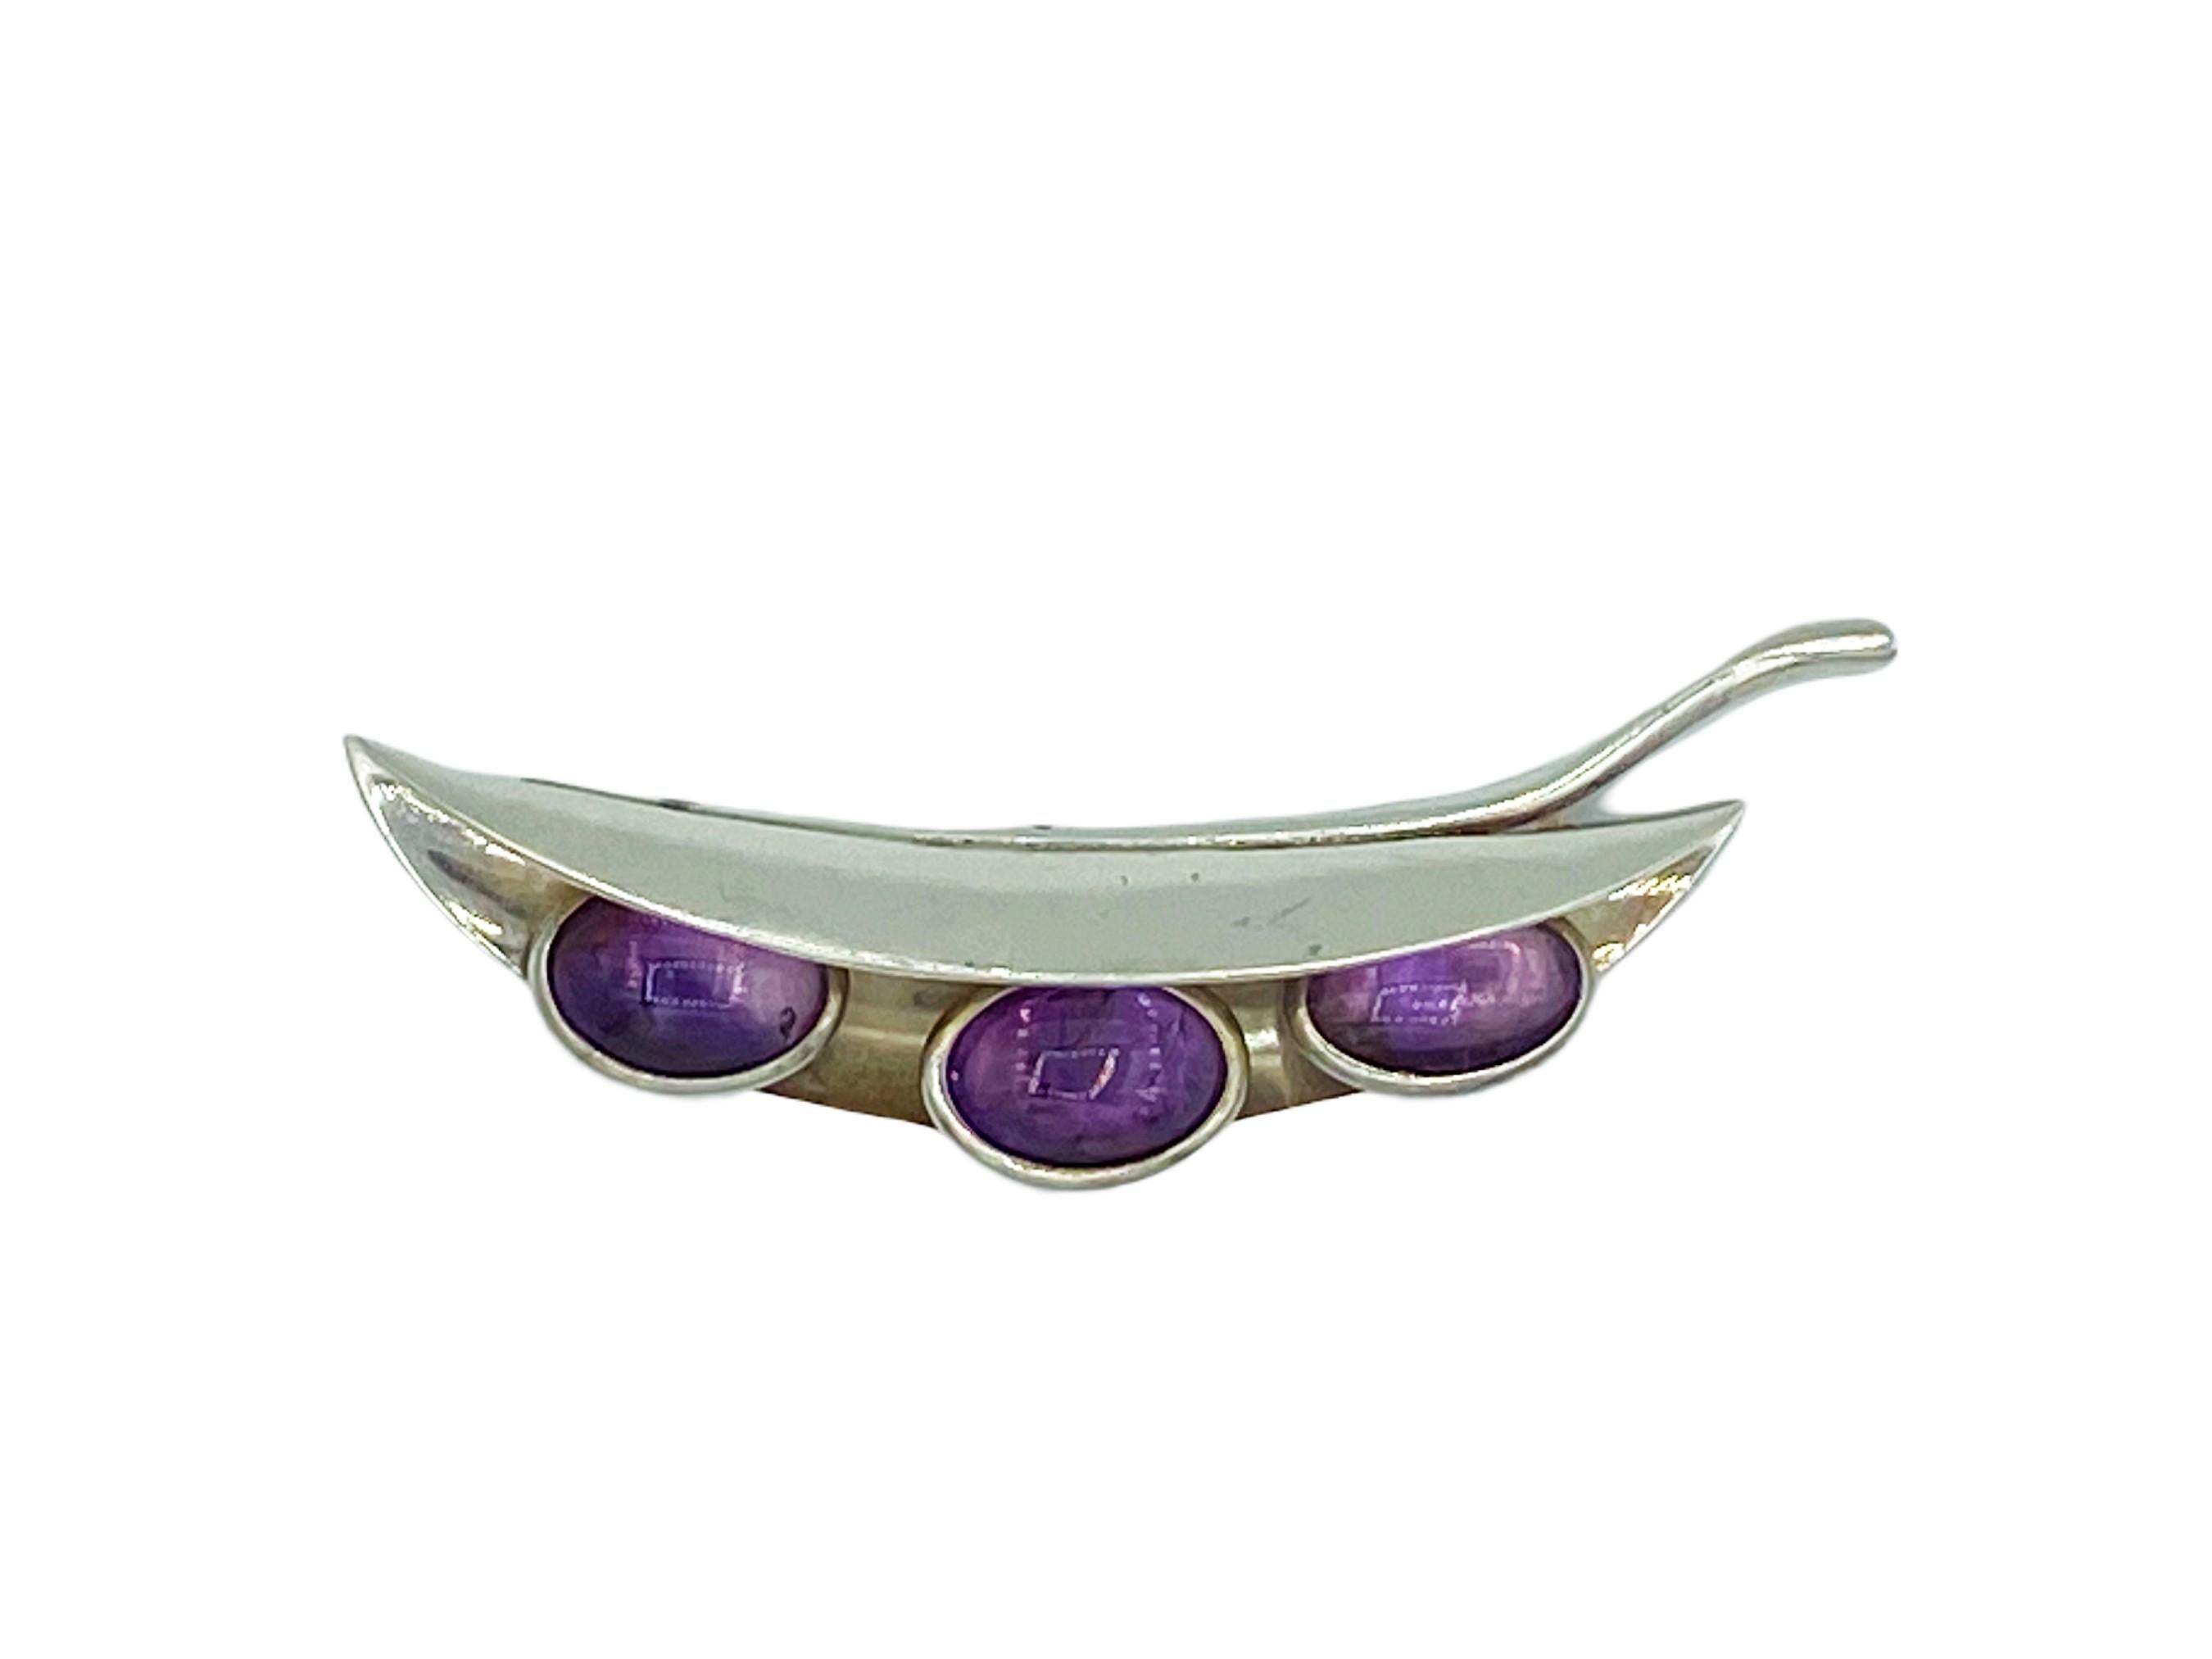 Absolutely stunning, avante garde work of wearable art by Taxco, Mexico master silversmith Antonio Pineda! In top quality 970 purity silver, this circa 1960s brooch is in the whimsical form of amethyst cabochon peas set in a silver pod. An amazing